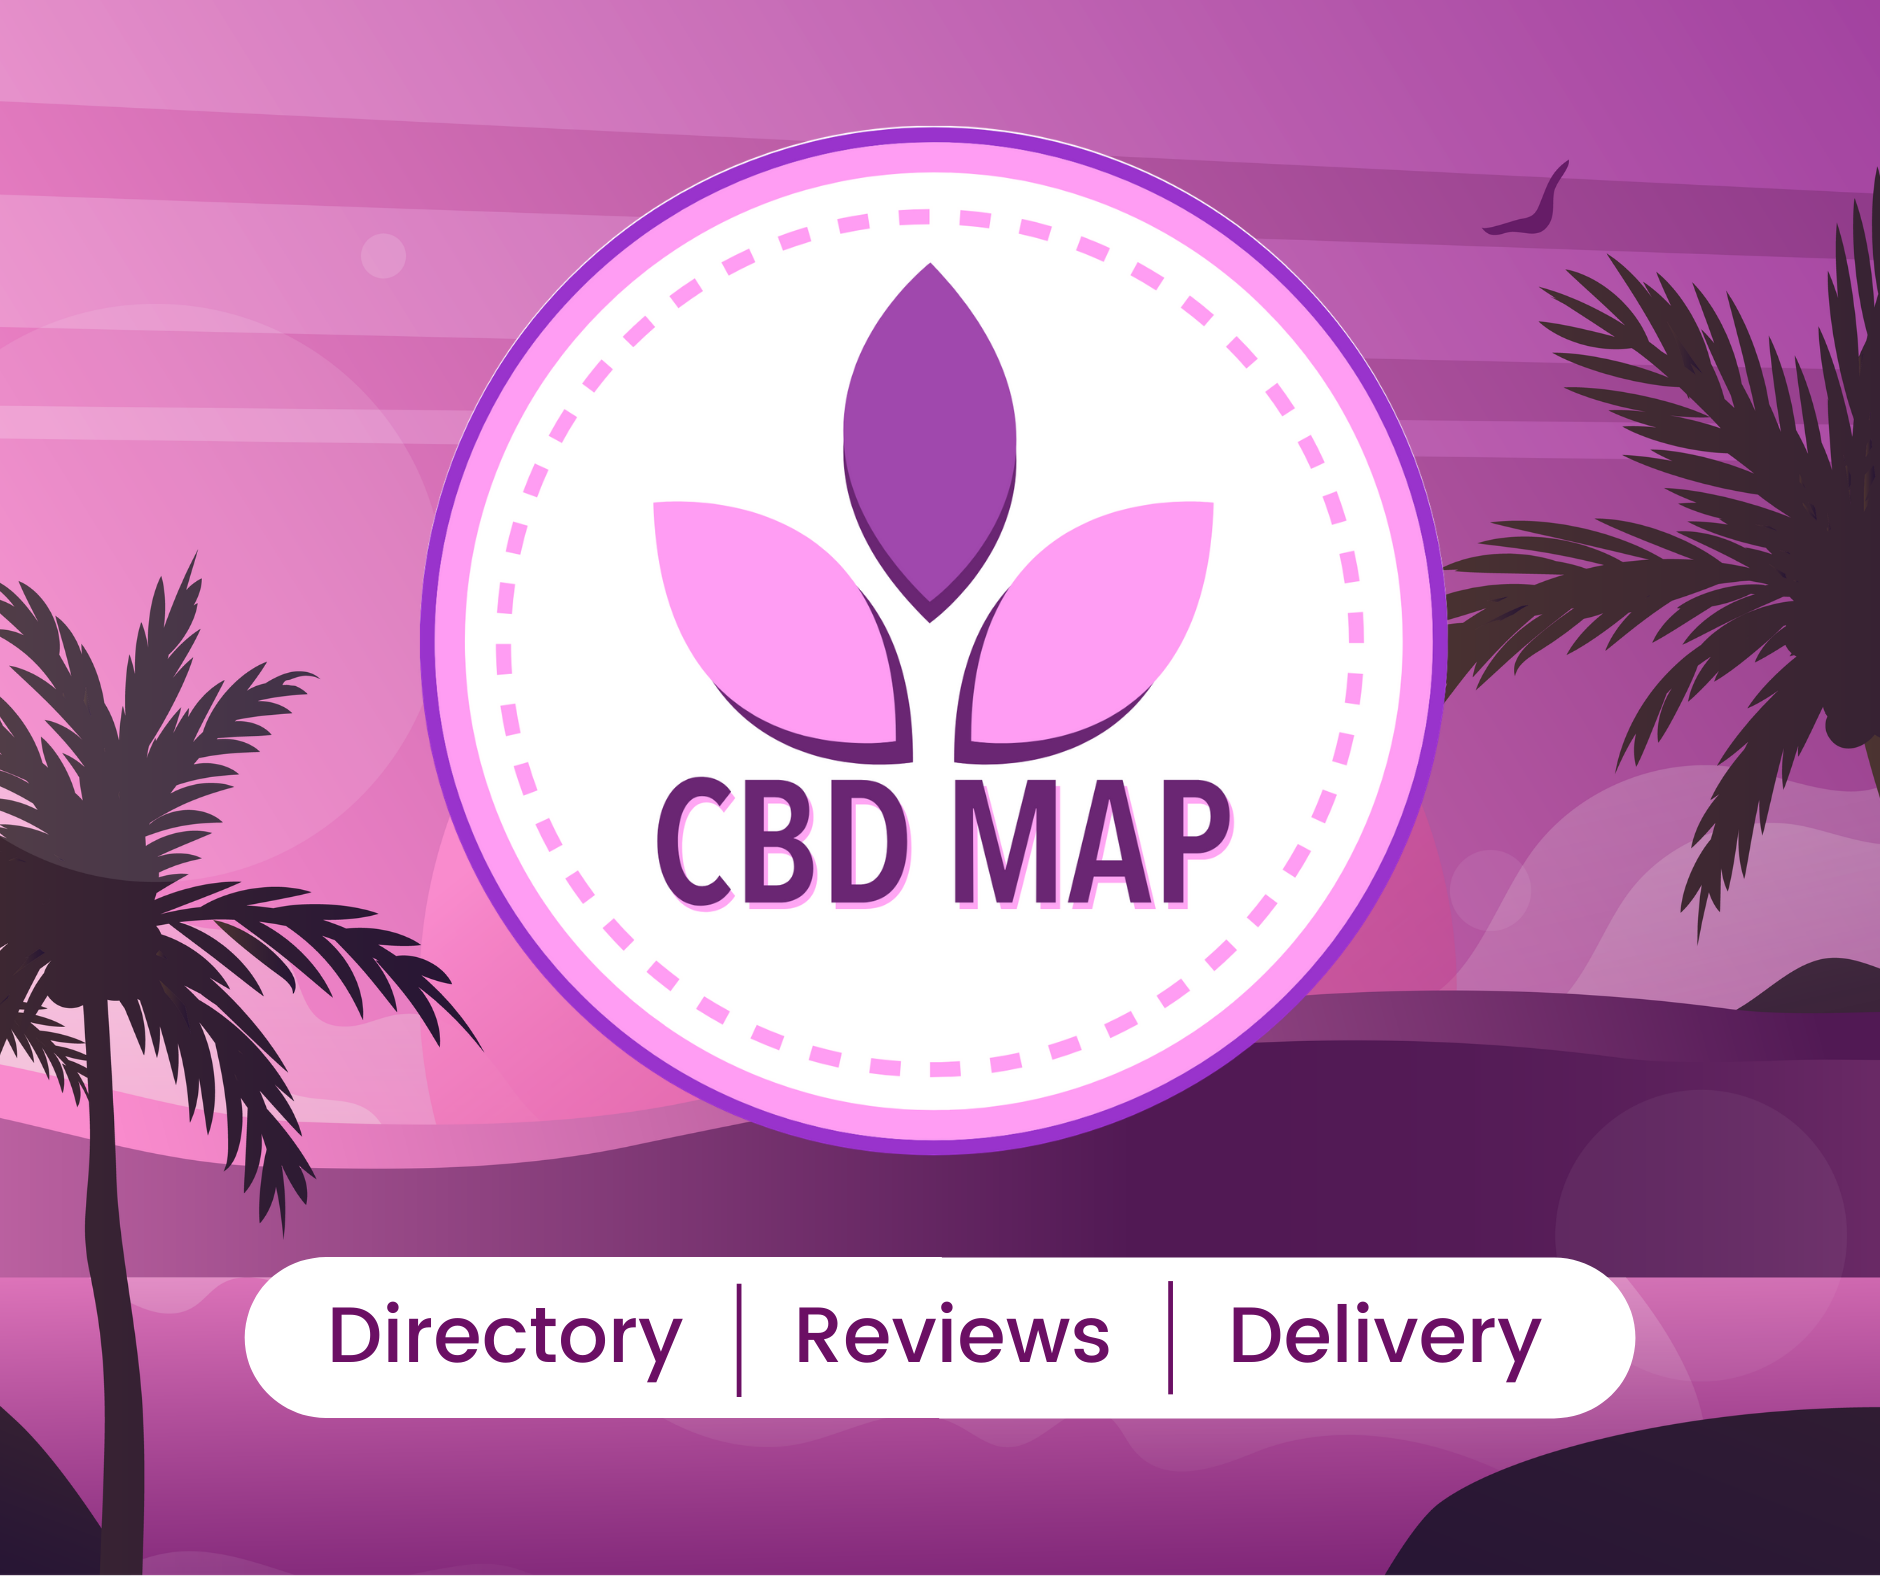 Local CBD Stores Partnering with Online Platform to Provide Contactless Pickup and 1-Hour Delivery in Los Angeles